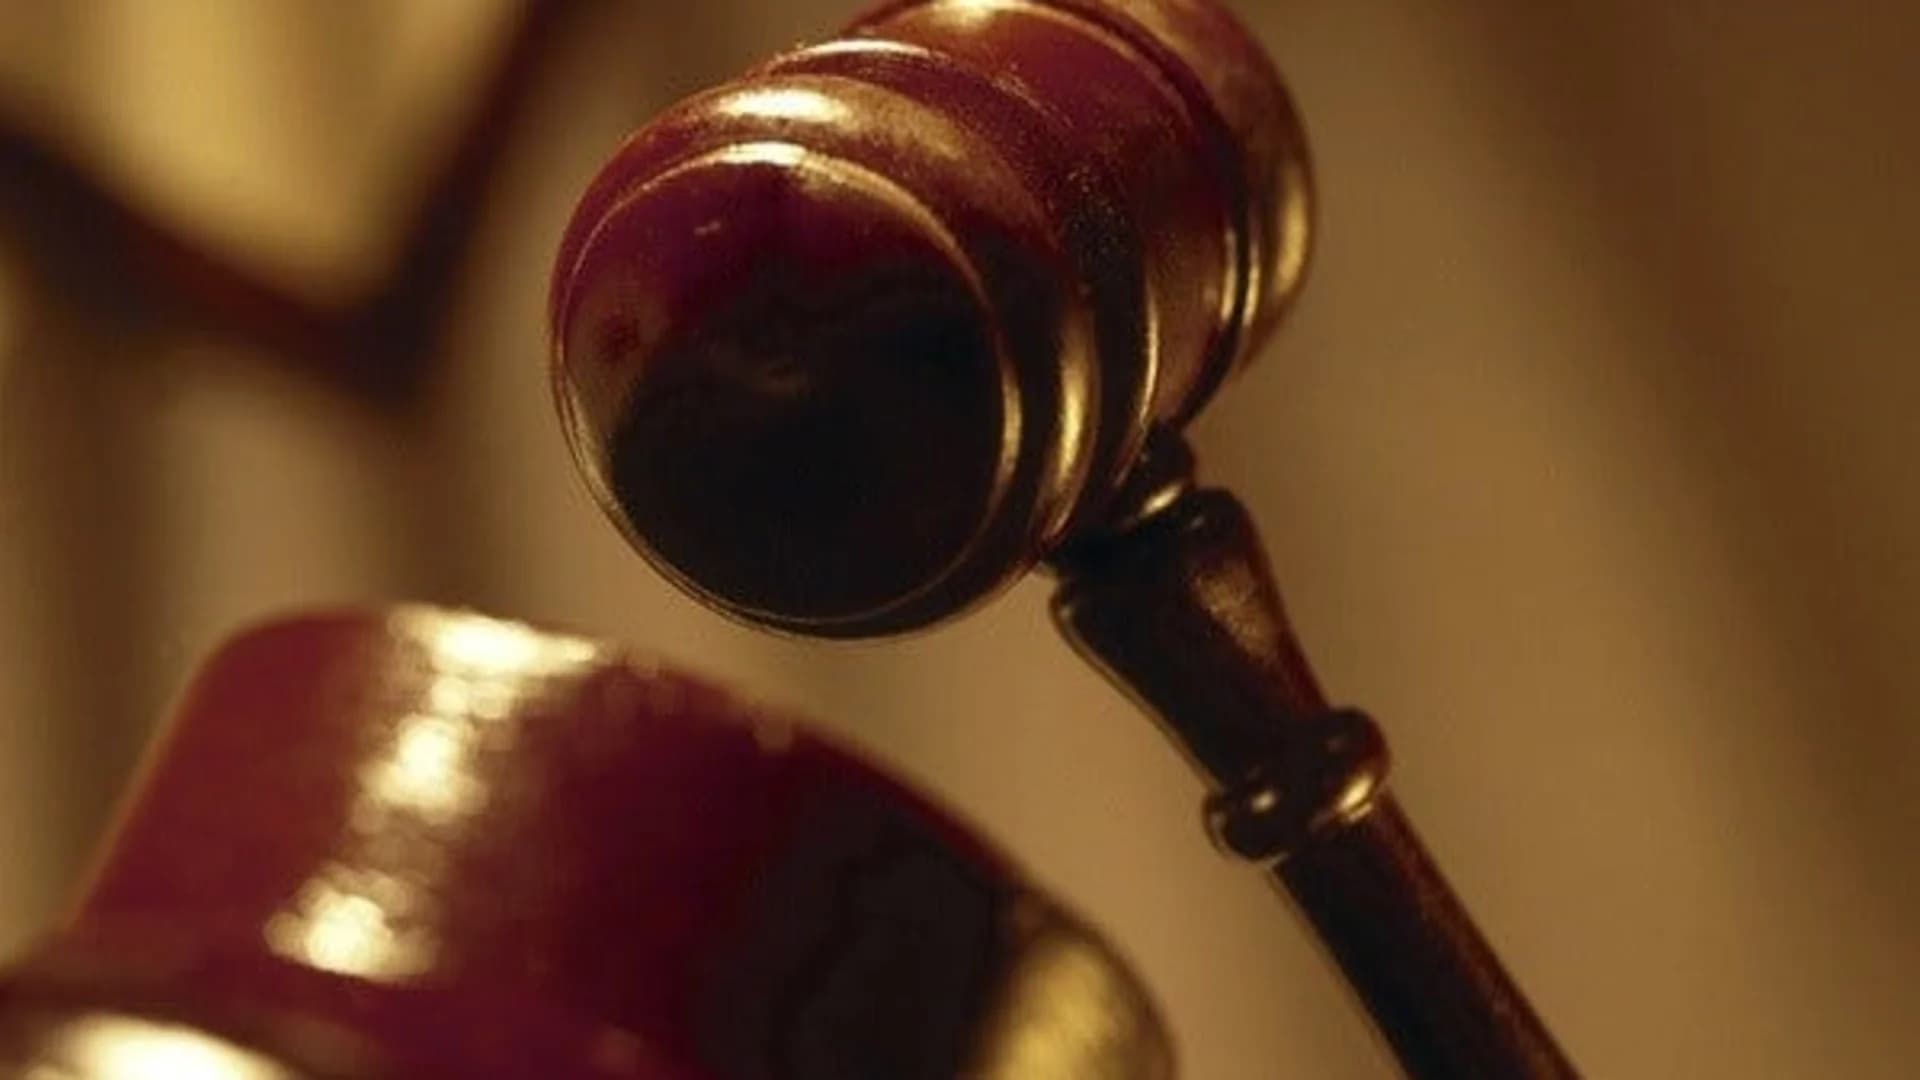 Lawsuit: Student raped by students who used "rock, paper scissors" to decide